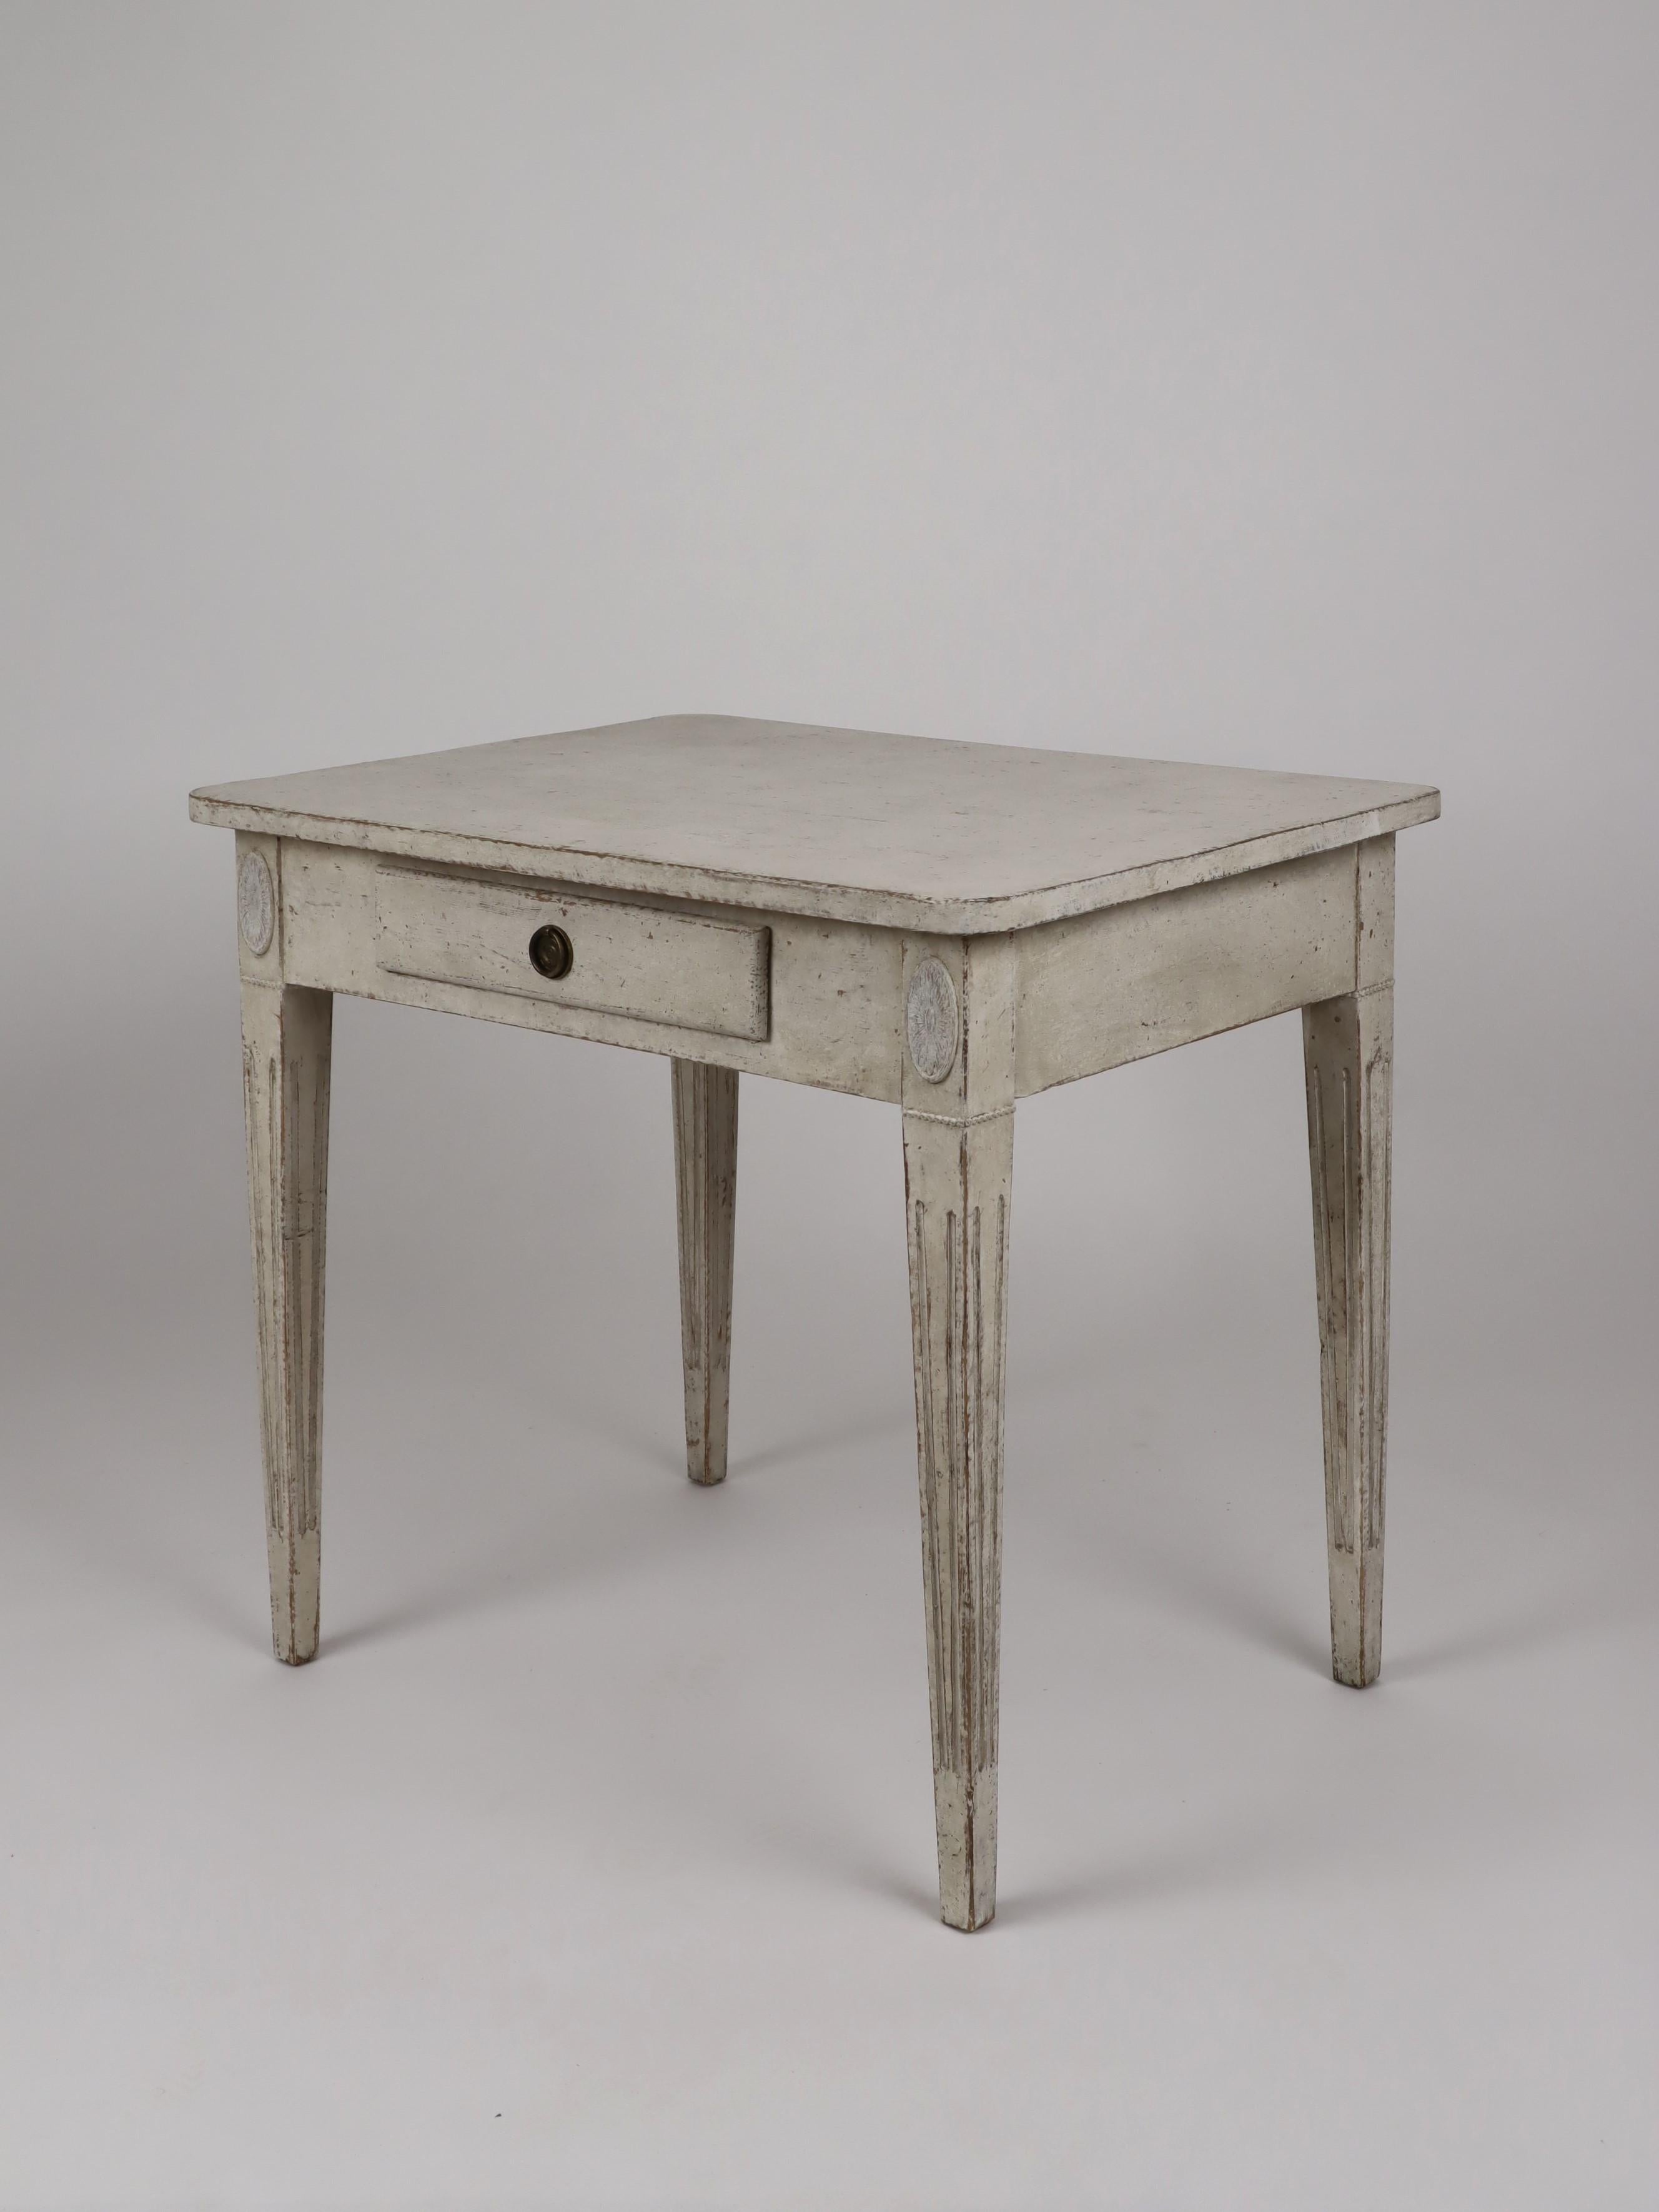 Swedish Gustavian Style 1850s Painted Desk with Single Drawer and Tapered Legs For Sale 2